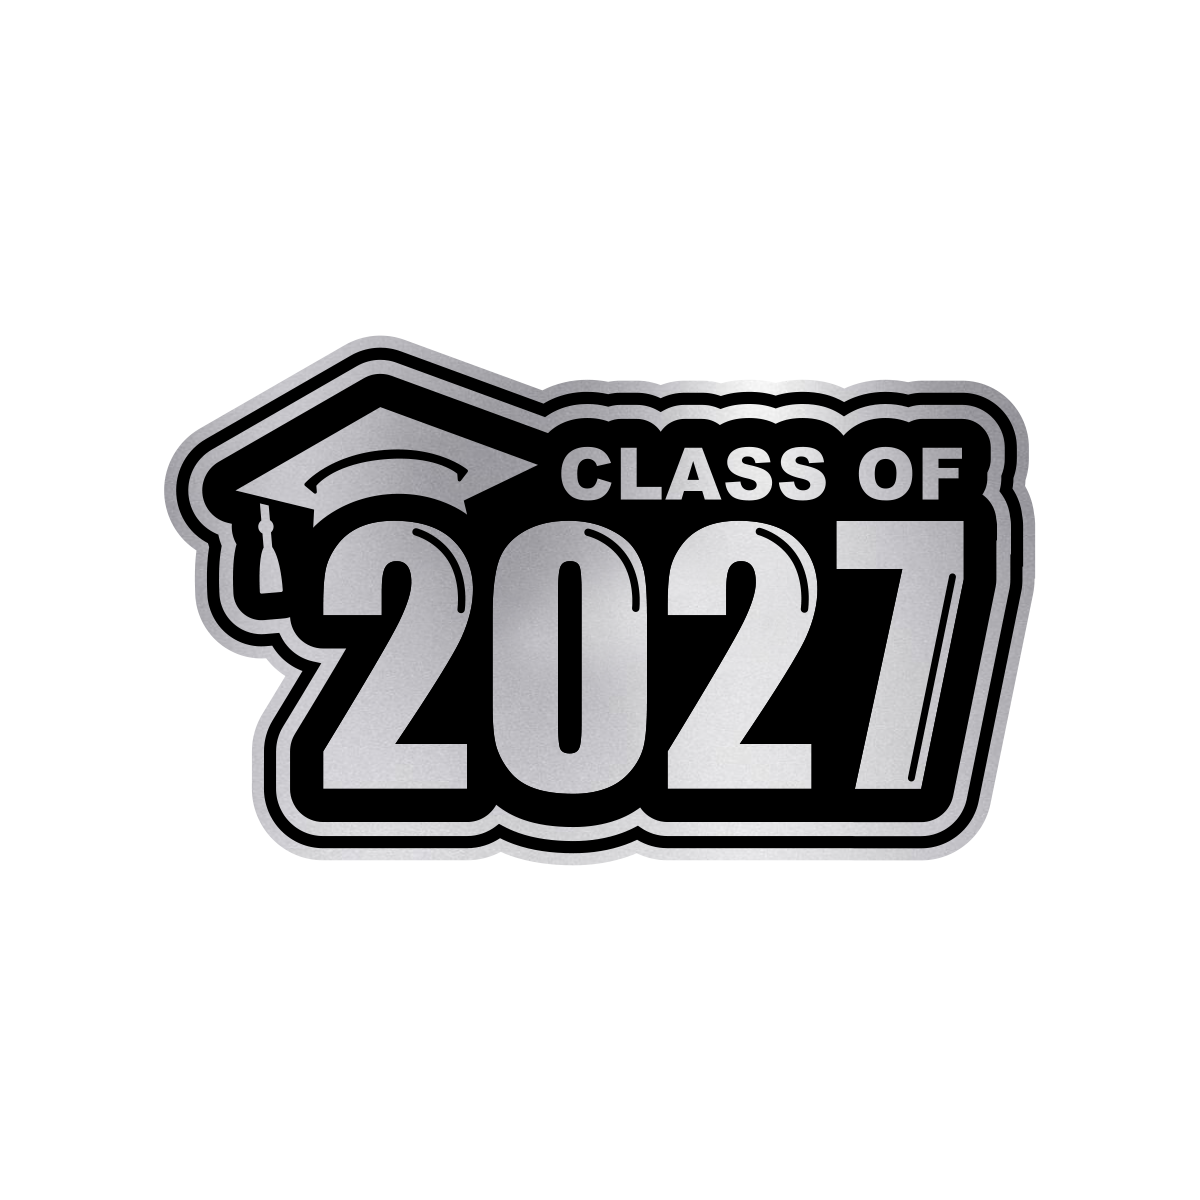 CLASS OF 2027; WHERE ARE THEY GOING? post thumbnail image